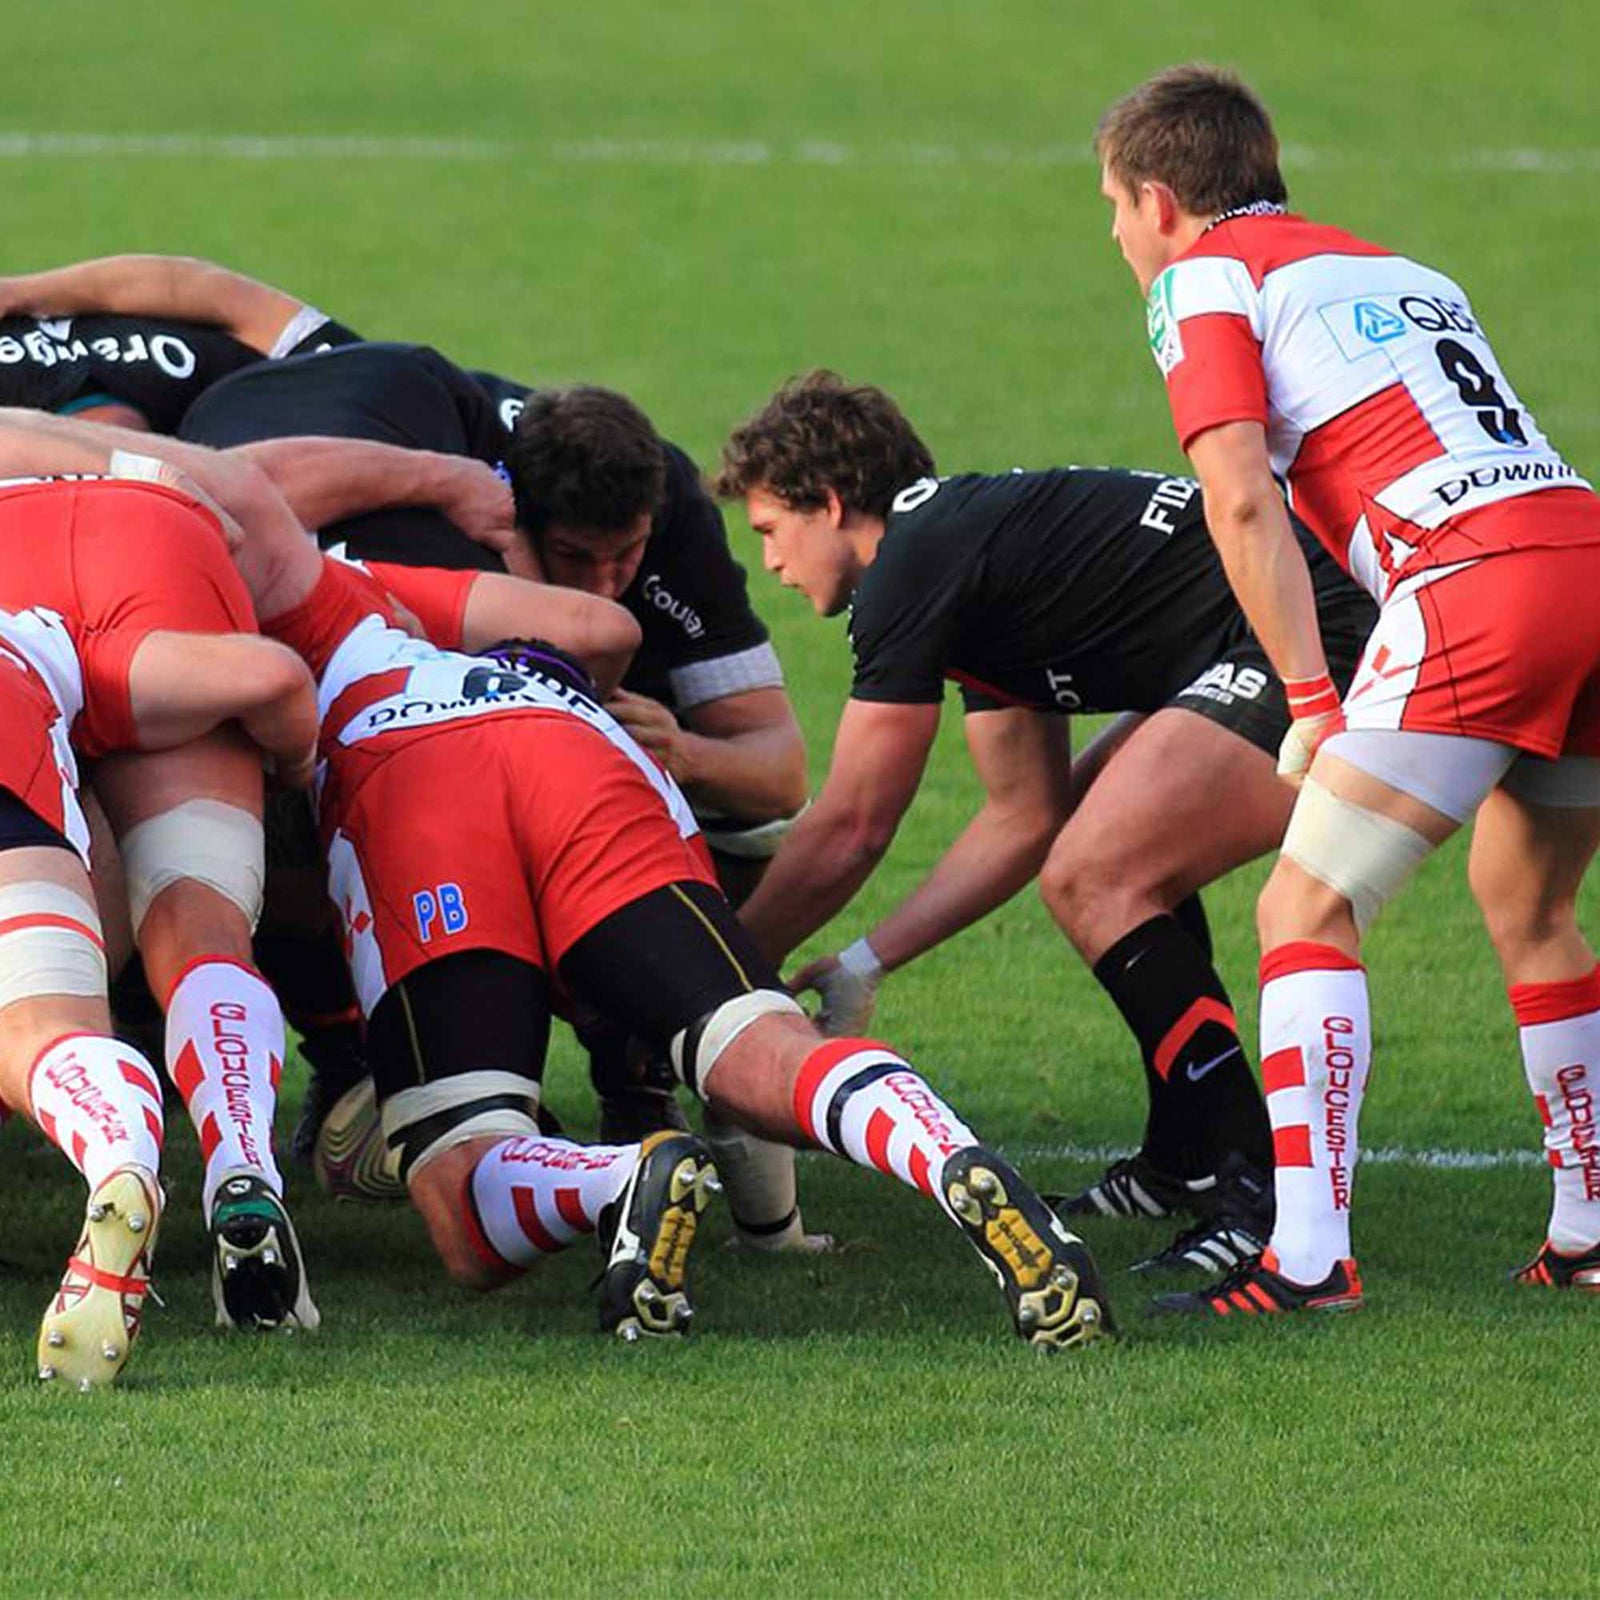 Are new Rugby Union rules discouraging good sportsmanship? - Absolute Rugby